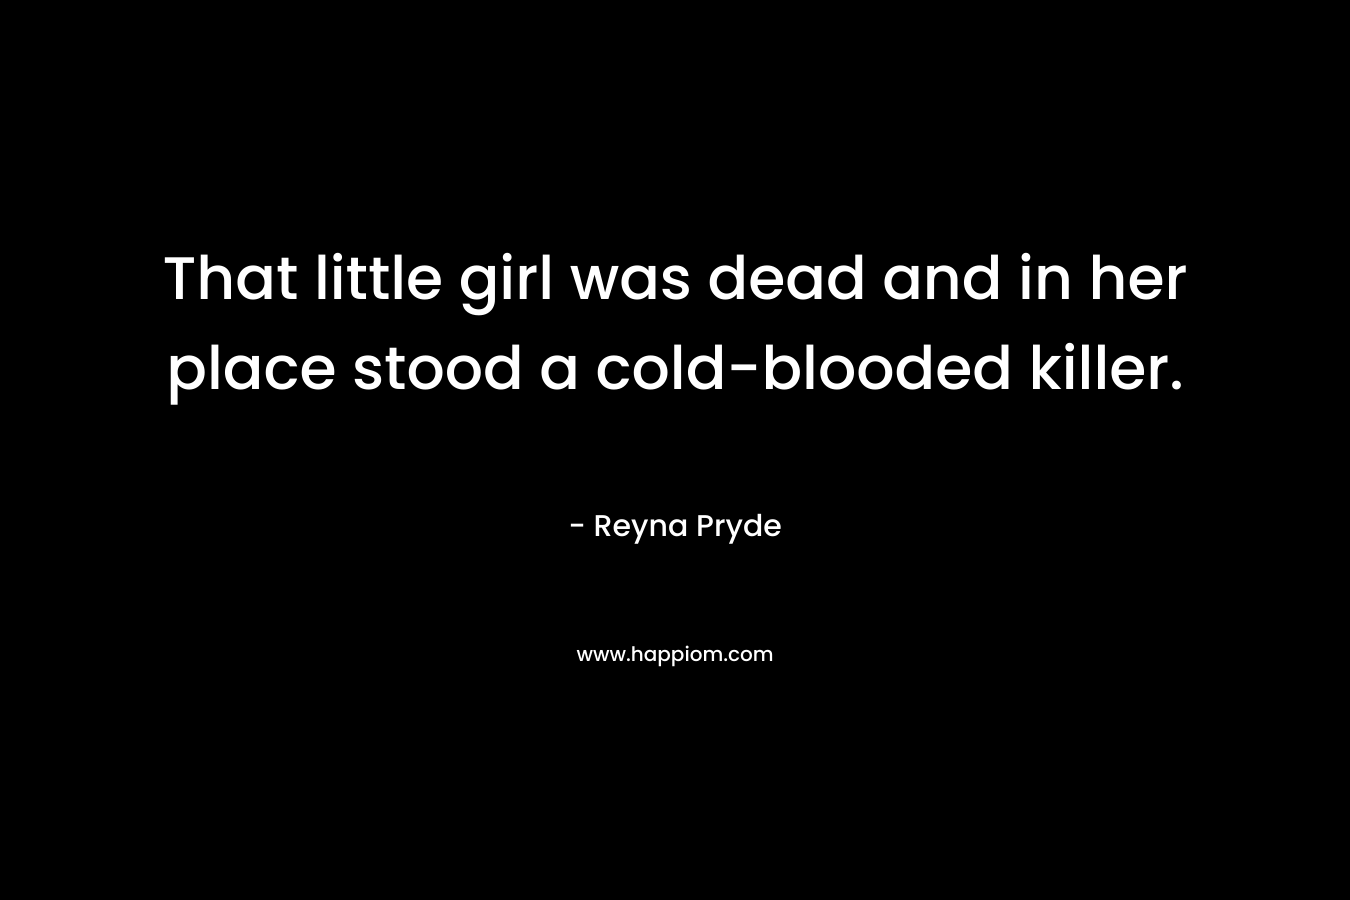 That little girl was dead and in her place stood a cold-blooded killer. – Reyna Pryde